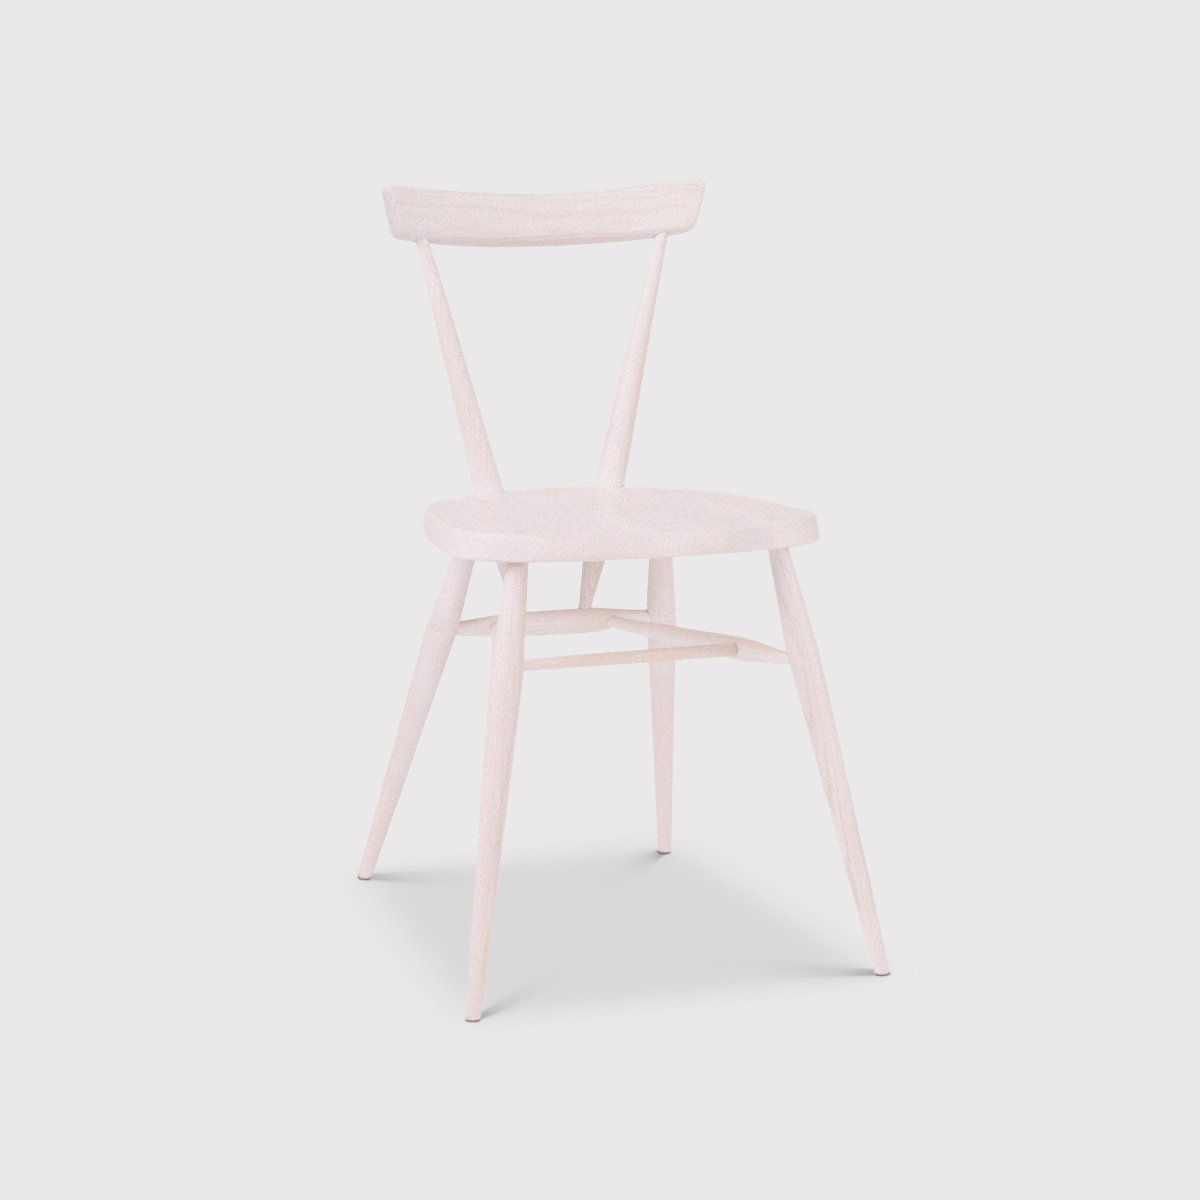 L.Ercolani Stacking Dining Chair, White | Barker & Stonehouse